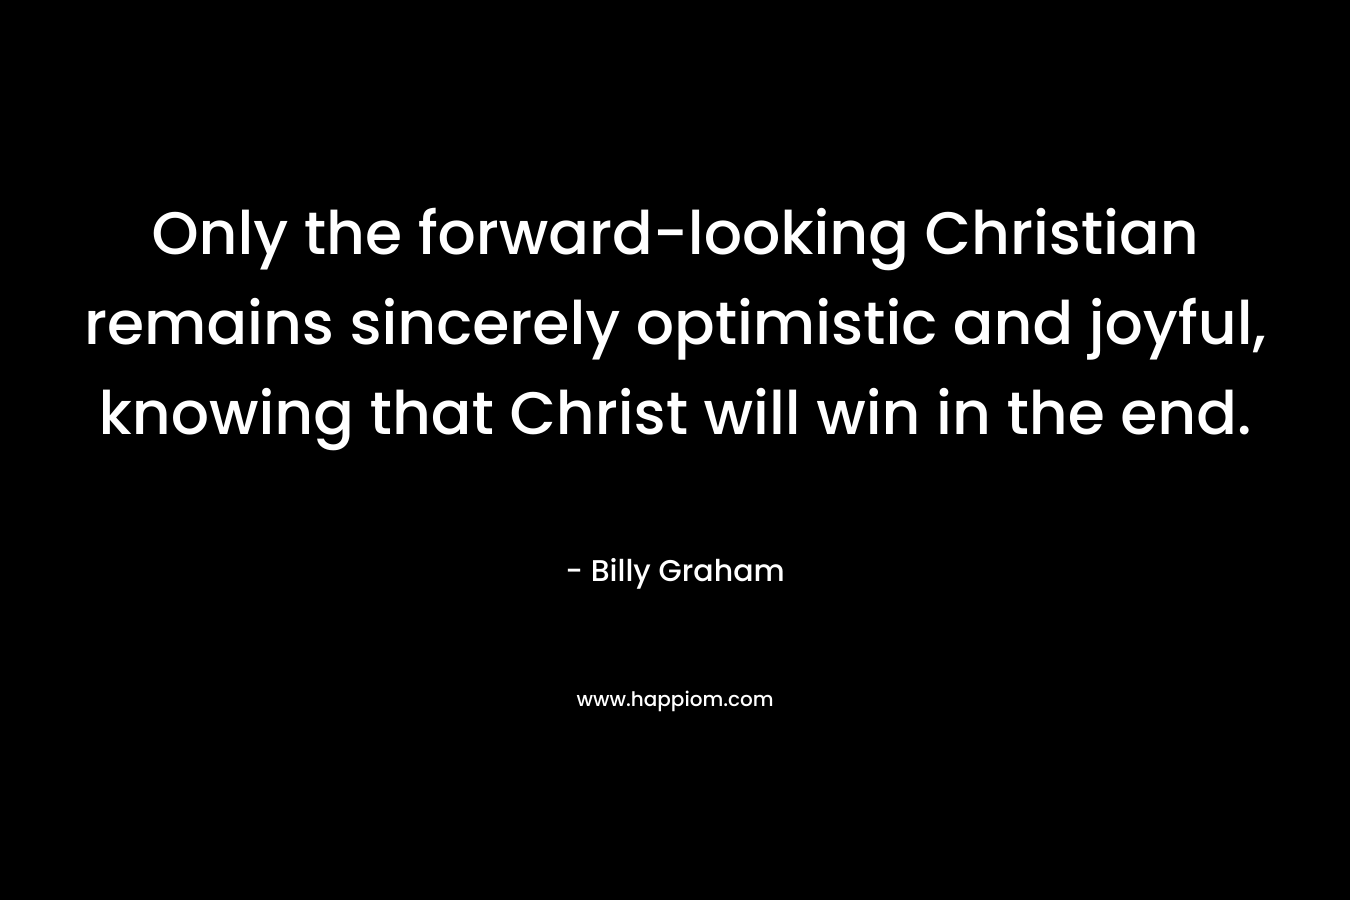 Only the forward-looking Christian remains sincerely optimistic and joyful, knowing that Christ will win in the end.